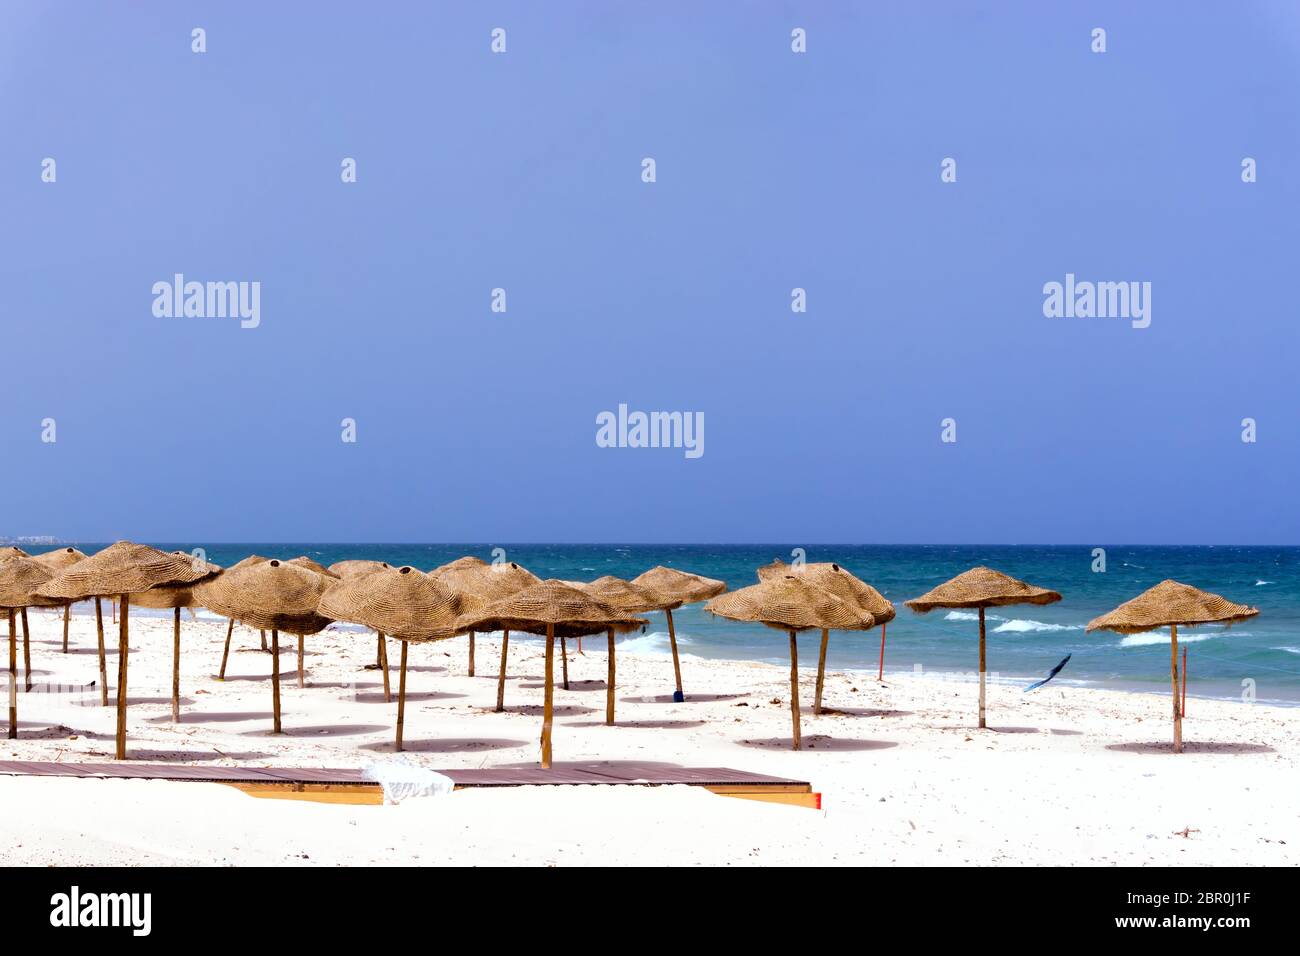 Landscape of empty beach covered with umbrellas in Sousse, Tunisia. Stock Photo